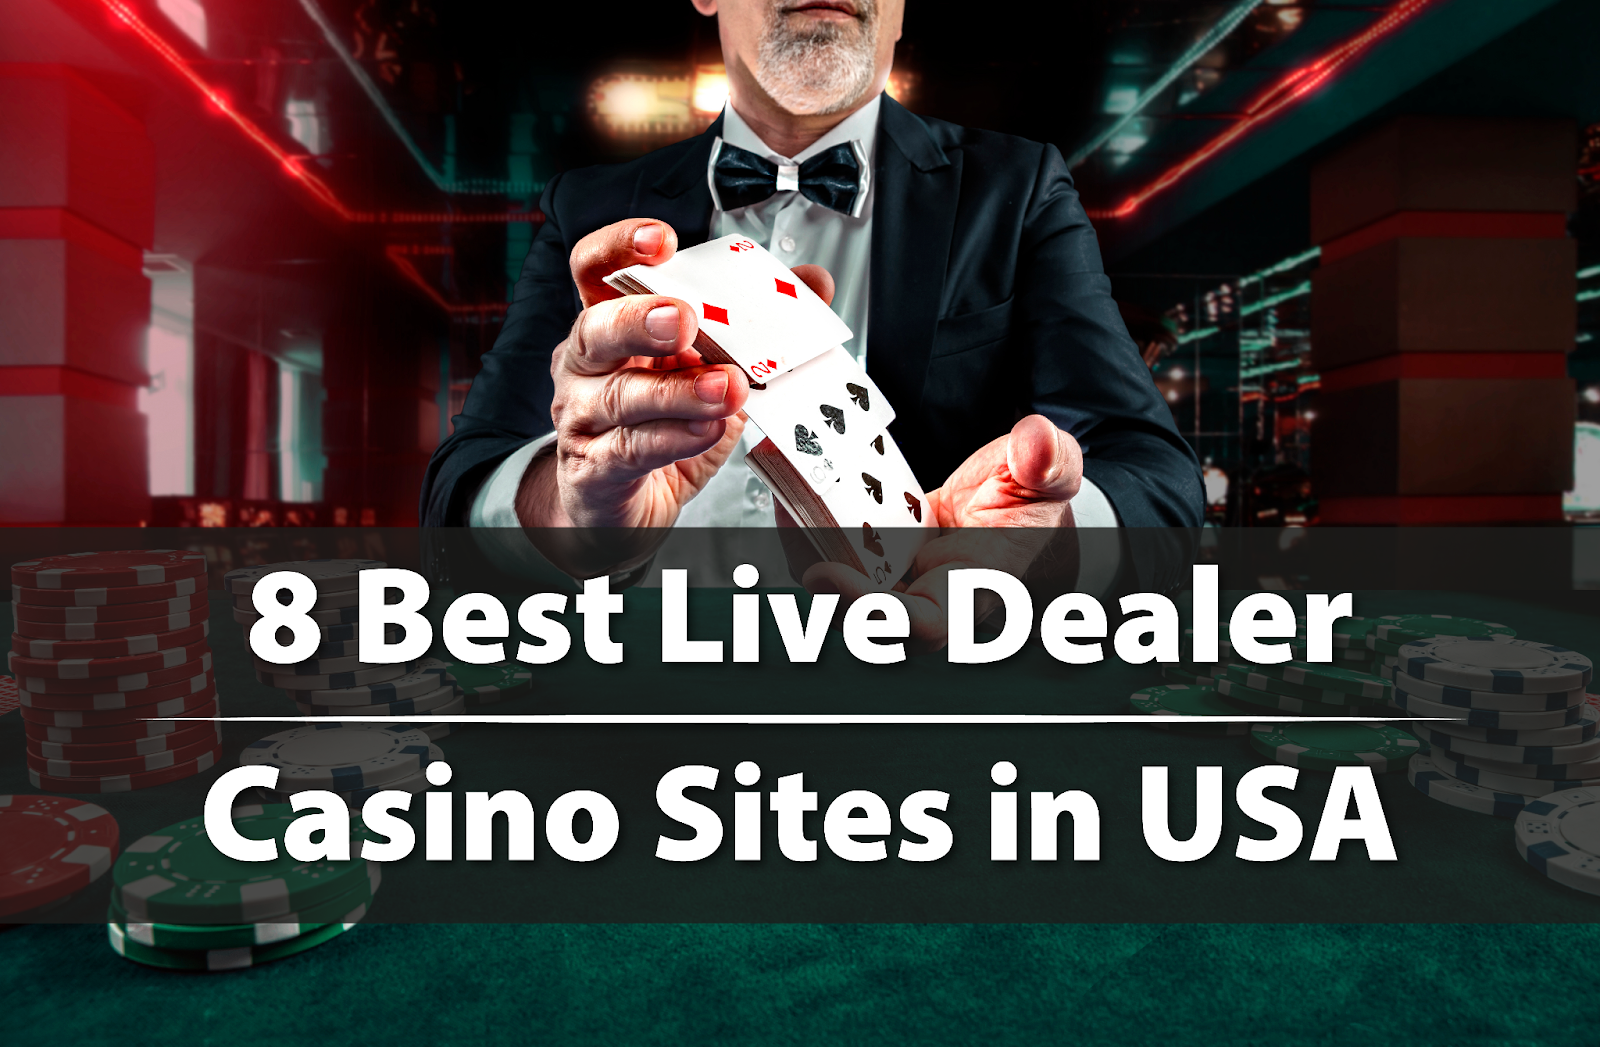 More on Making a Living Off of online casino